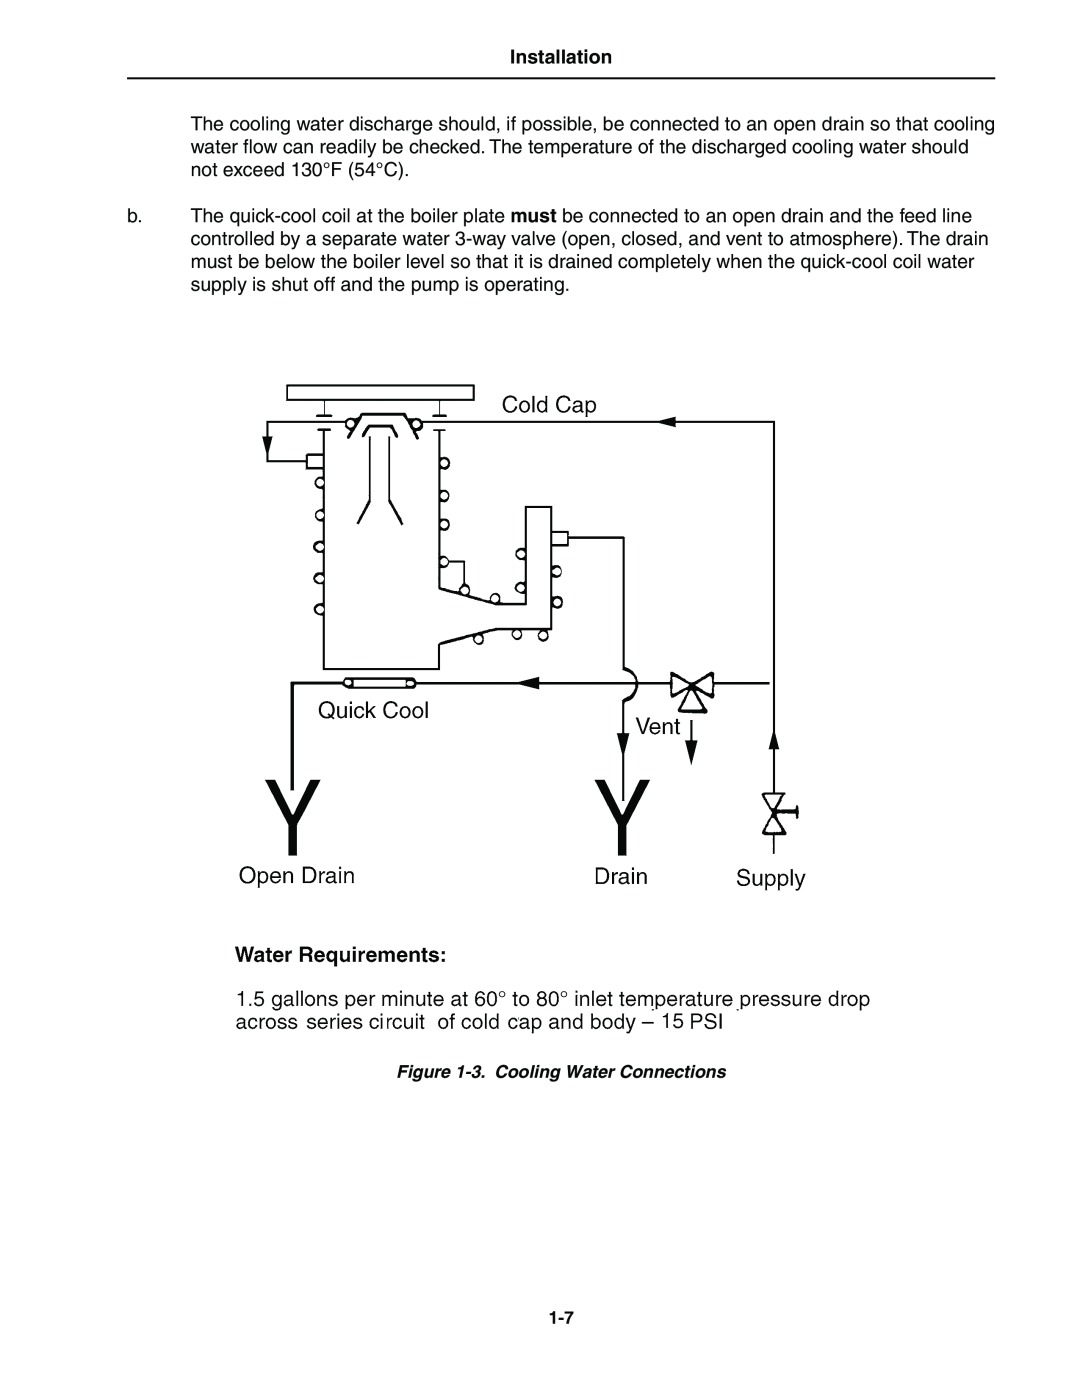 Bissell HS-20 instruction manual Installation, 3. Cooling Water Connections 